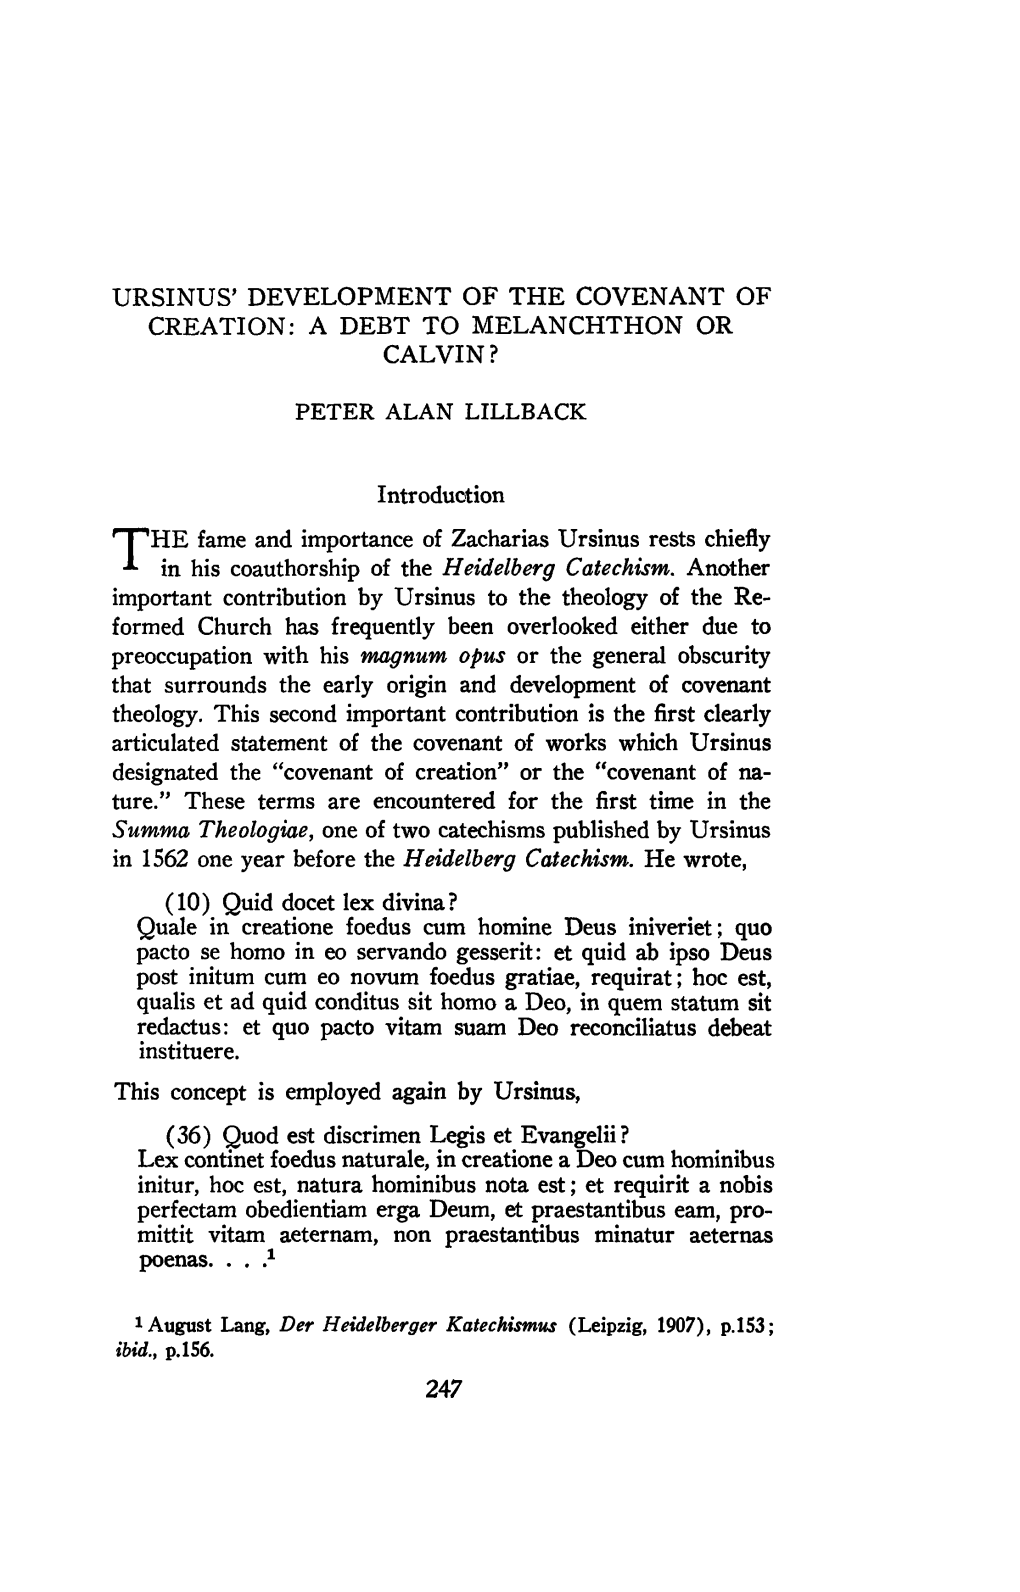 Ursinus' Development of the Covenant of Creation: a Debt to Melanchthon Or Calvin?